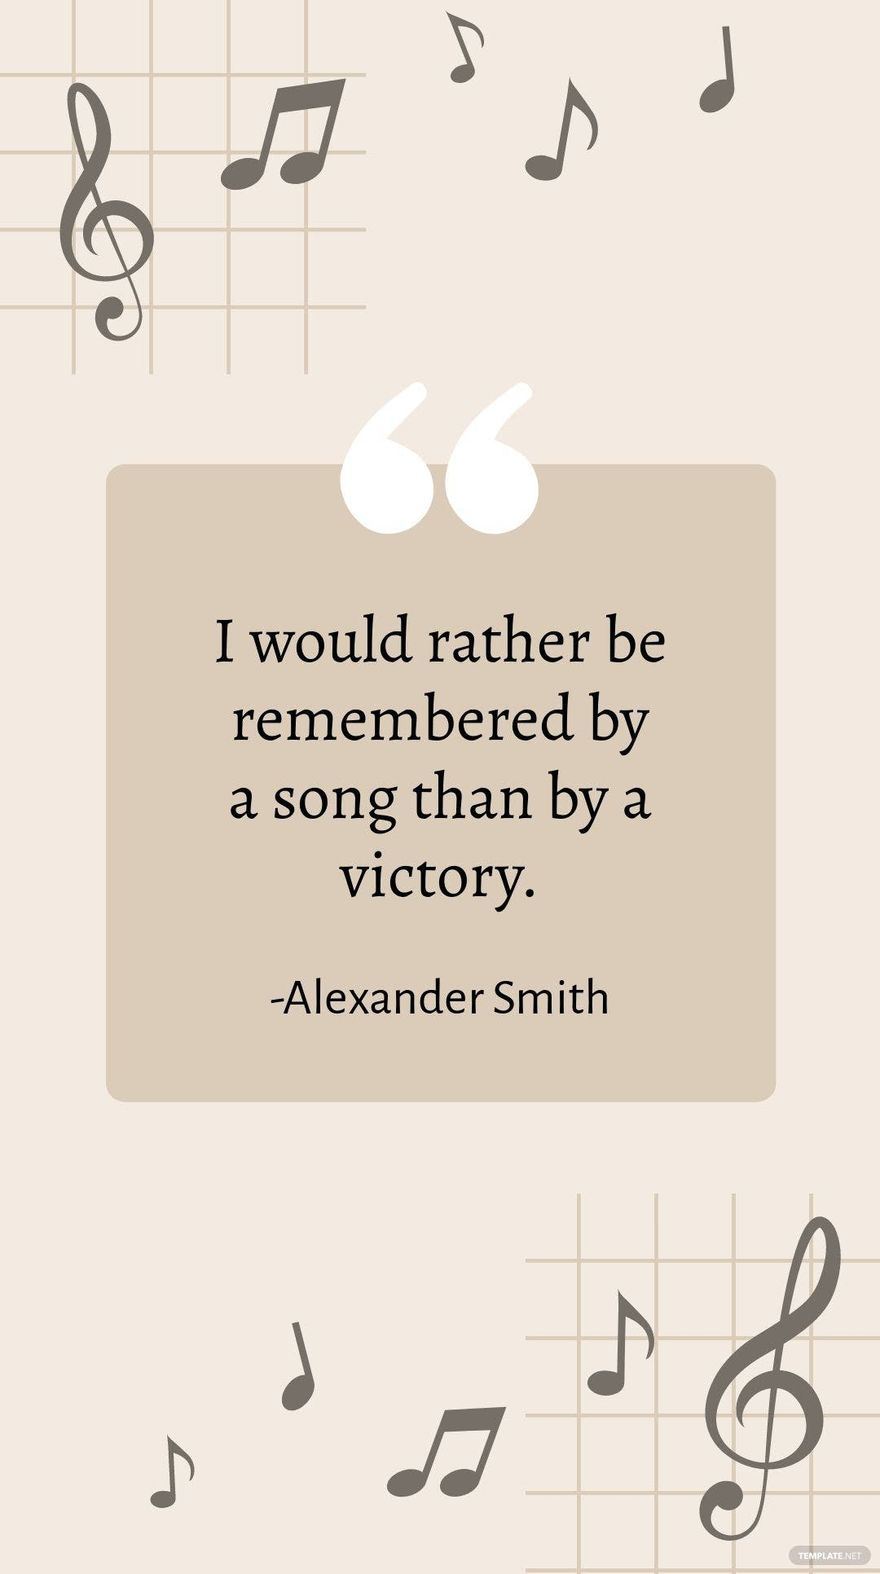 Free Alexander Smith - I would rather be remembered by a song than by a victory.  in JPG